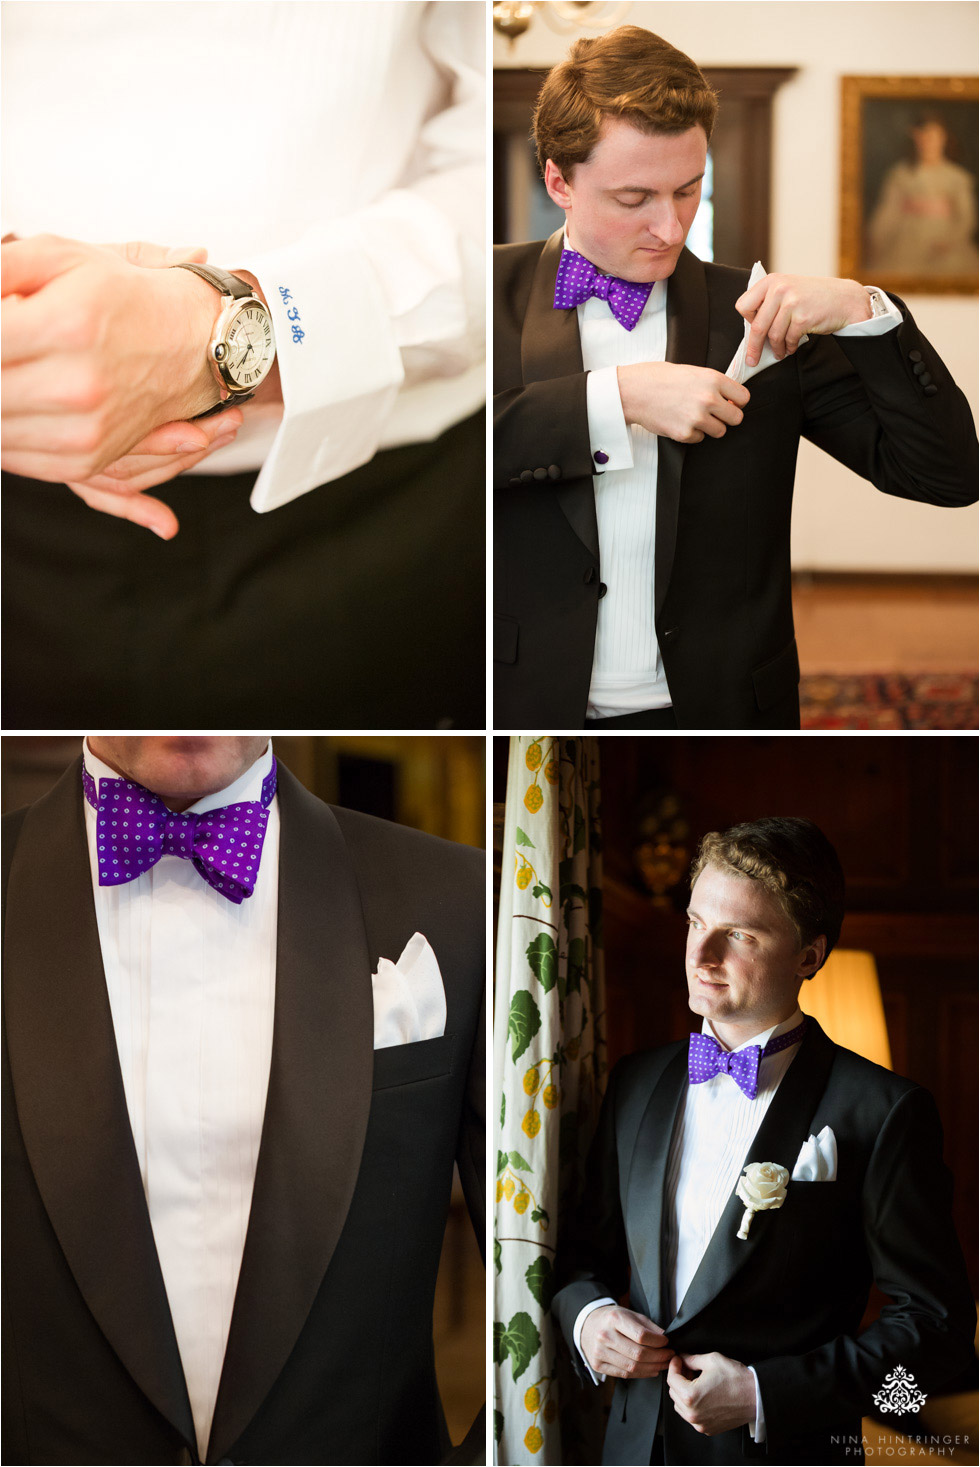 Detail shots of the groom getting ready at Schloss Prielau, Zell am See, Salzburg, Austria - Blog of Nina Hintringer Photography - Wedding Photography, Wedding Reportage and Destination Weddings